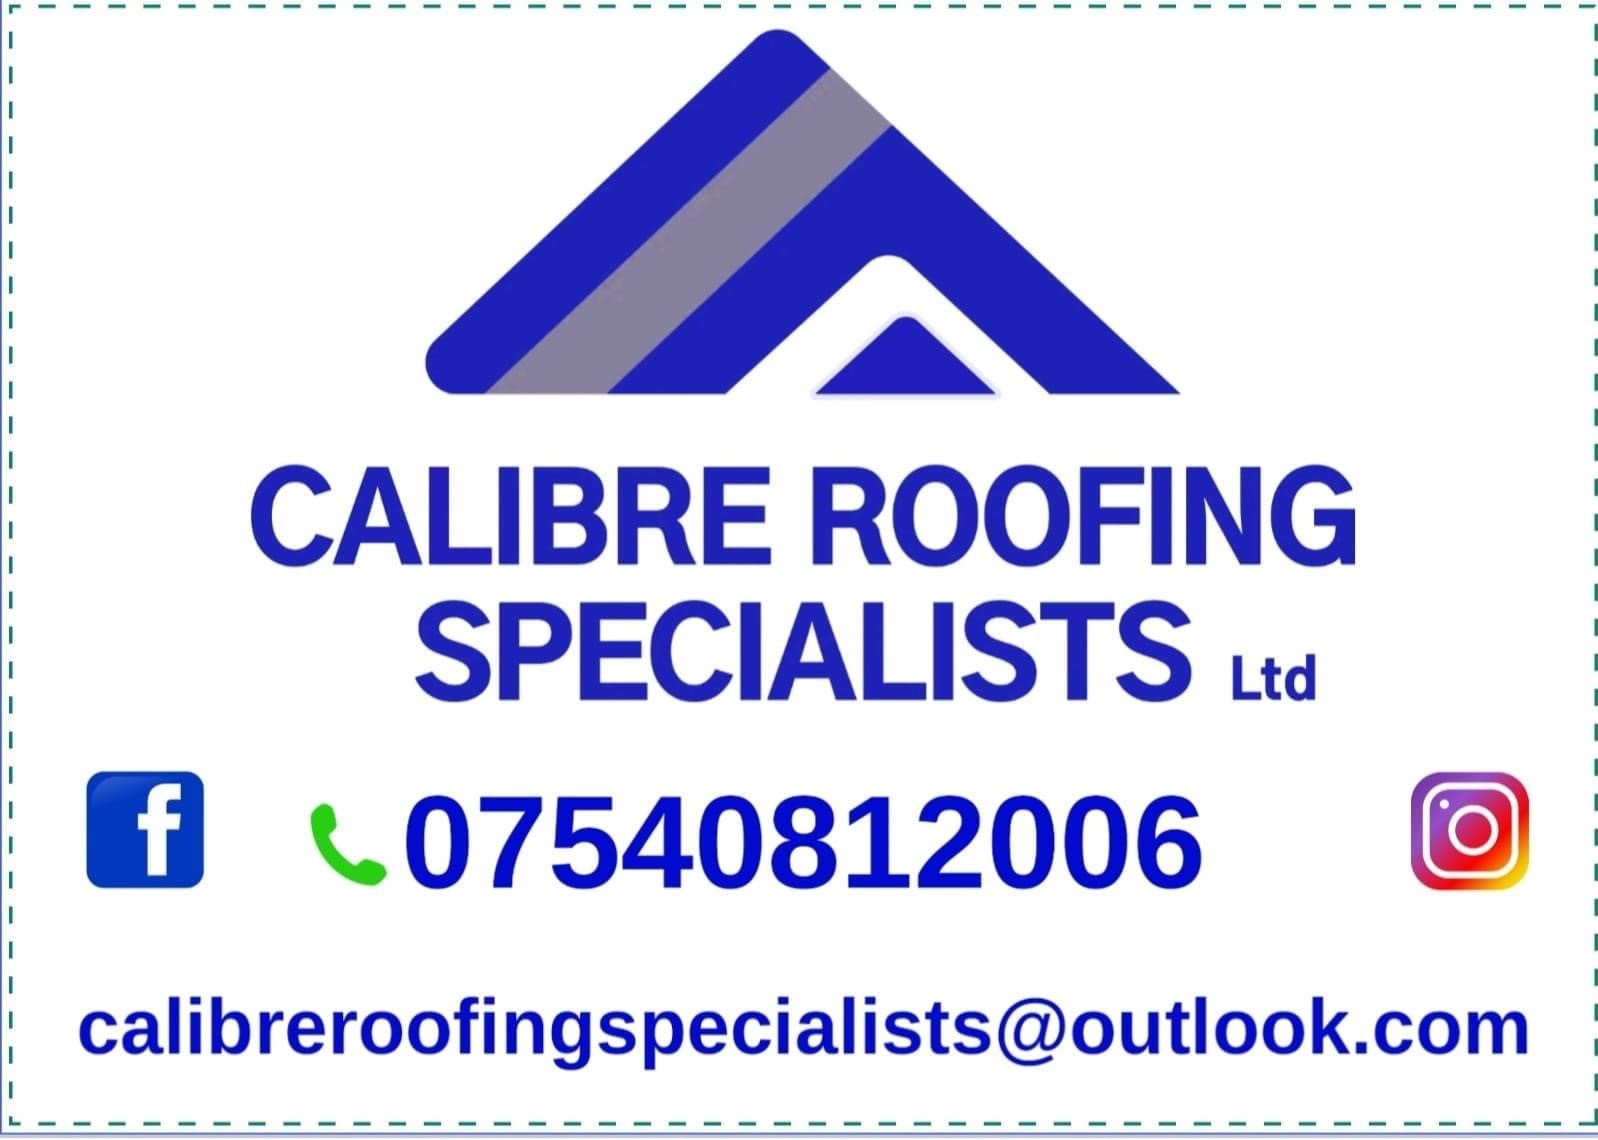 Calibre Roofing Specialists